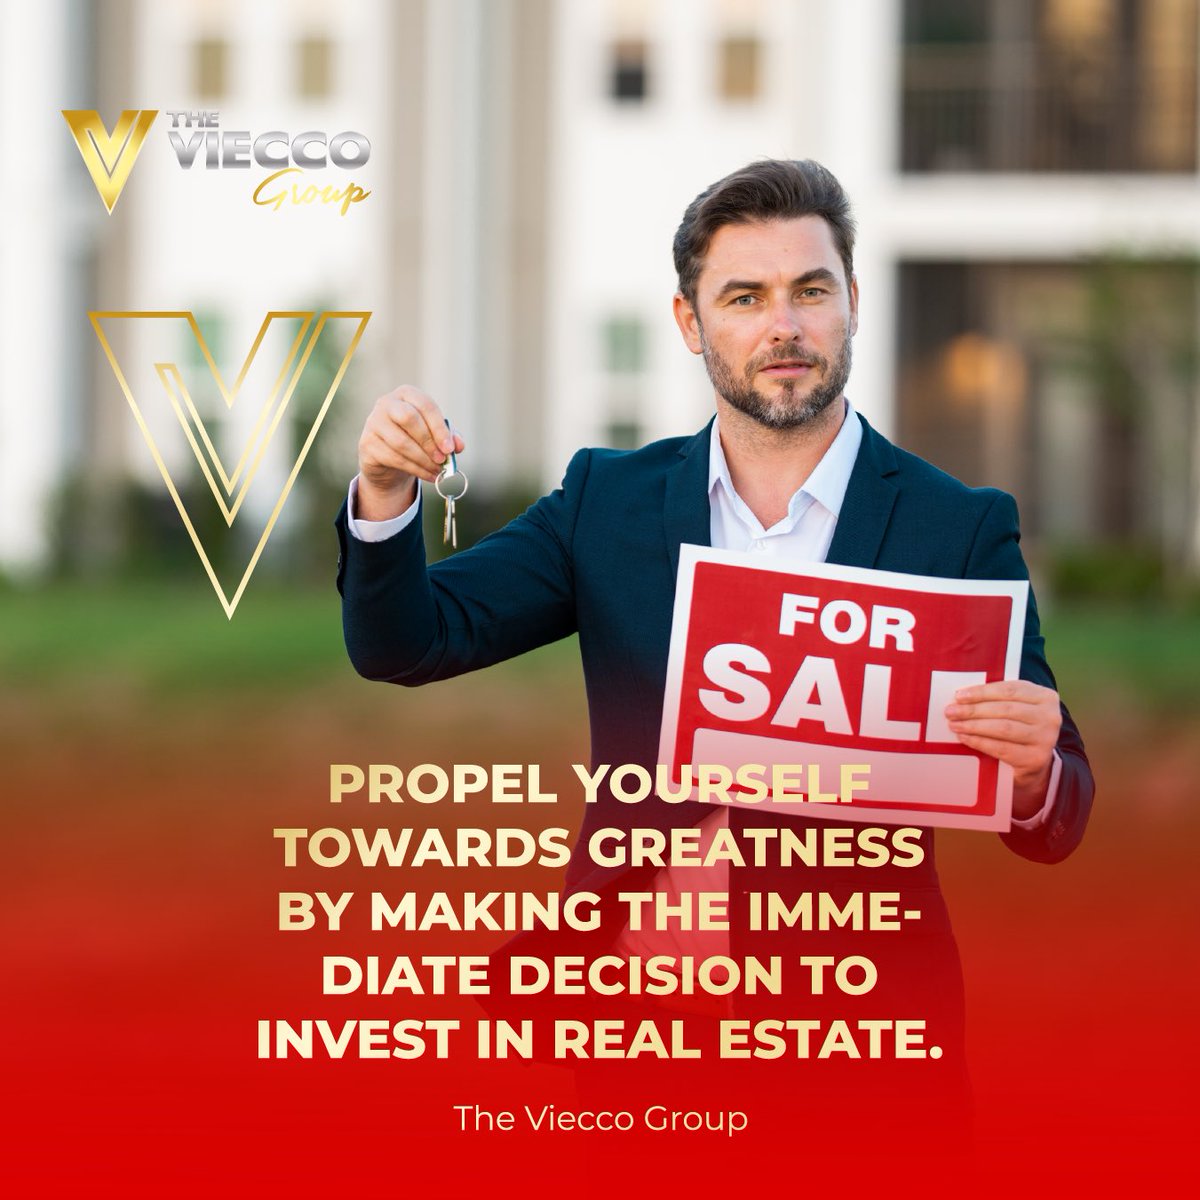 At The VIECCO Group Always Helping our Communities to Build Wealth through Homeownership!!!!!

#thevieccogroup #makingthingshappen #successstory #thenewbanking #construyendoriqueza #buildingwealth #entrepreneur #entrepreneurship #luxury #topproducer #mortgages #sales #business…